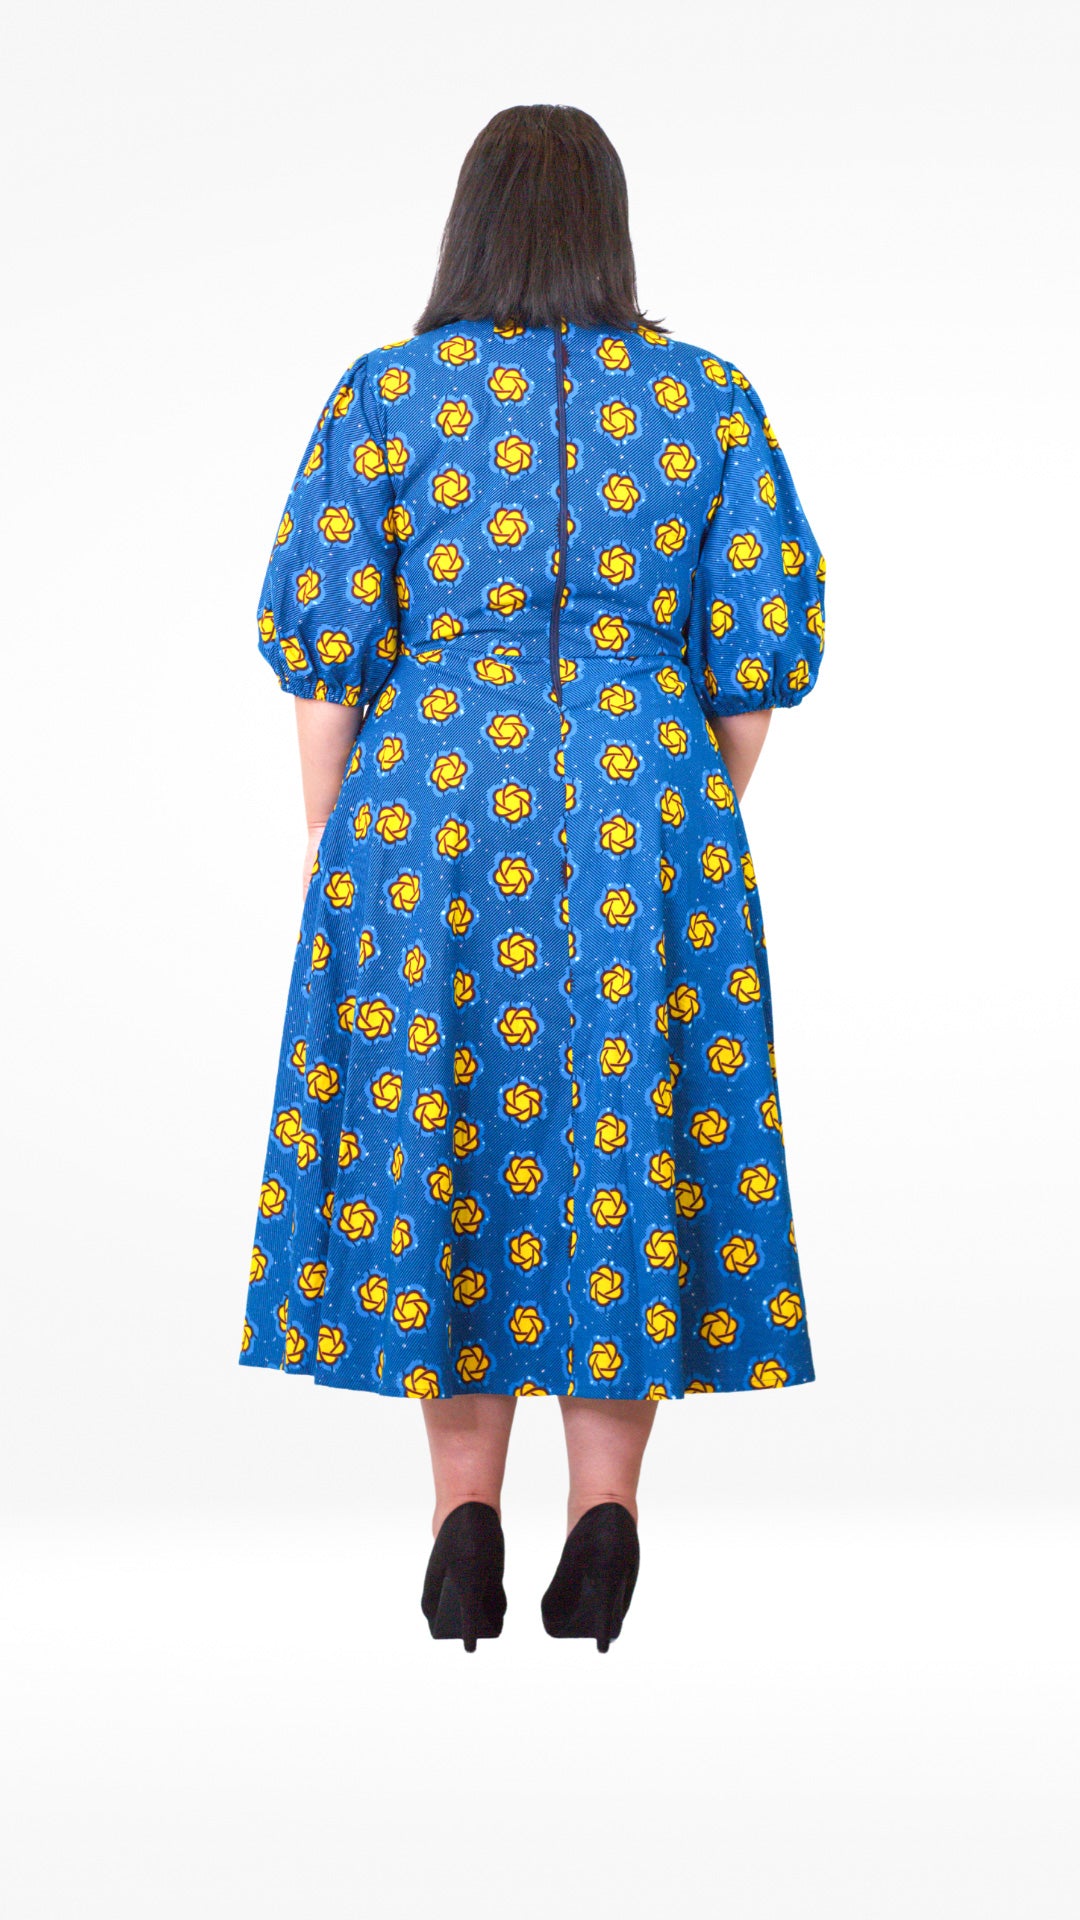 The rear view of the blue puff sleeve long dress, showcasing a zipper, added for functionality.